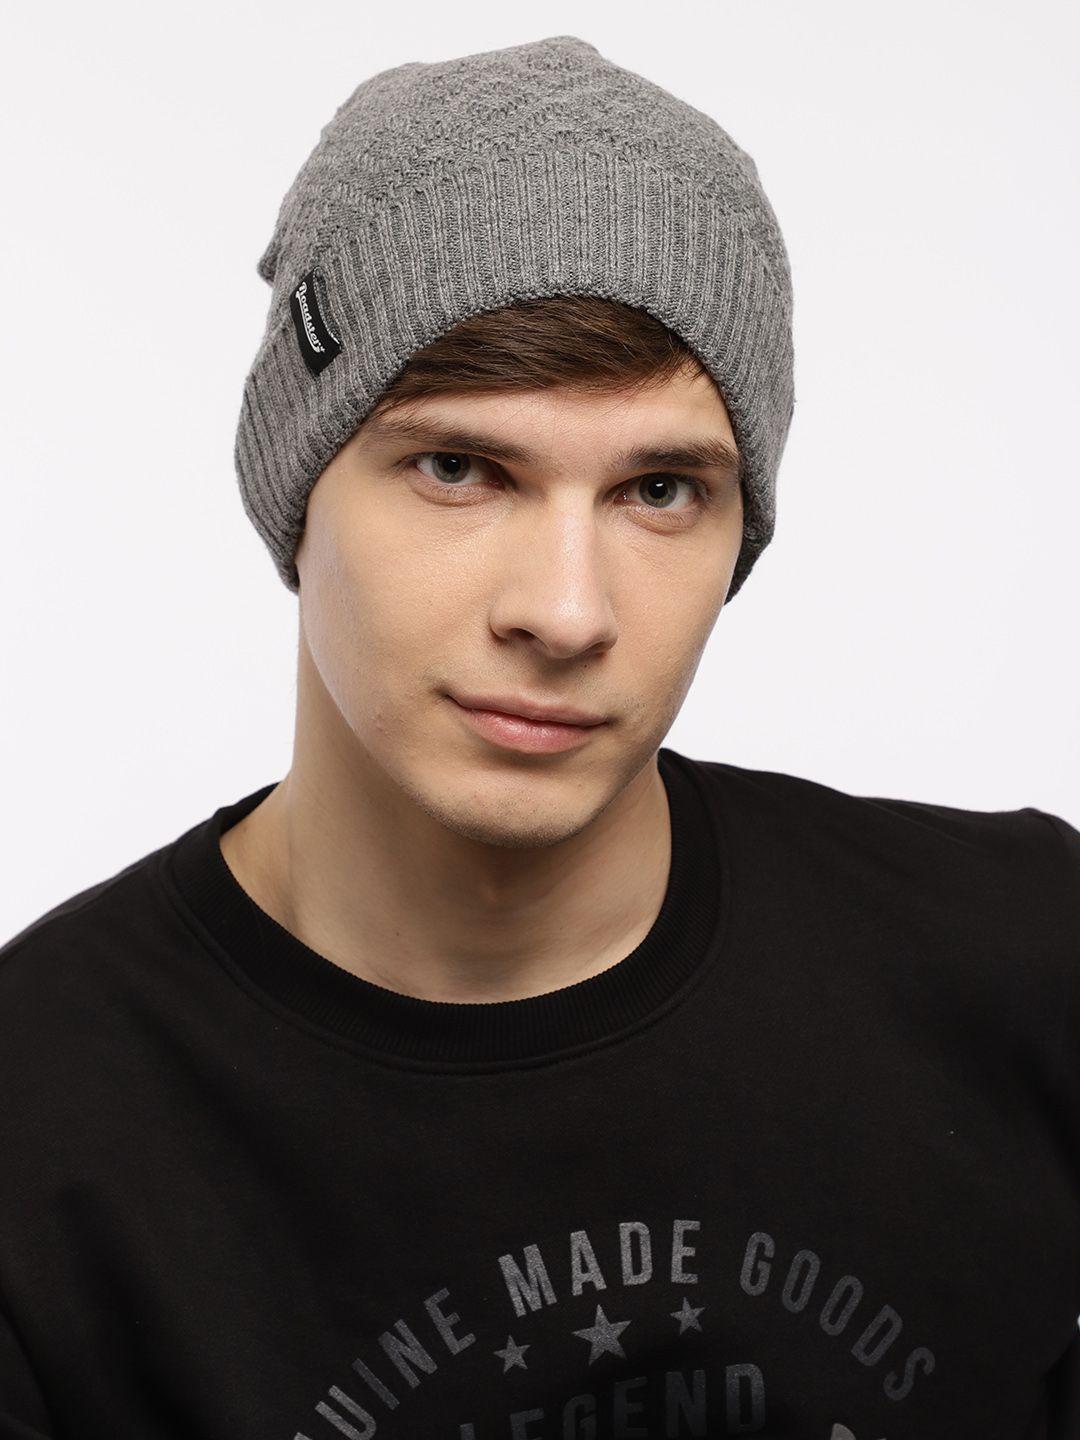 the roadster lifestyle co unisex grey self-design beanie